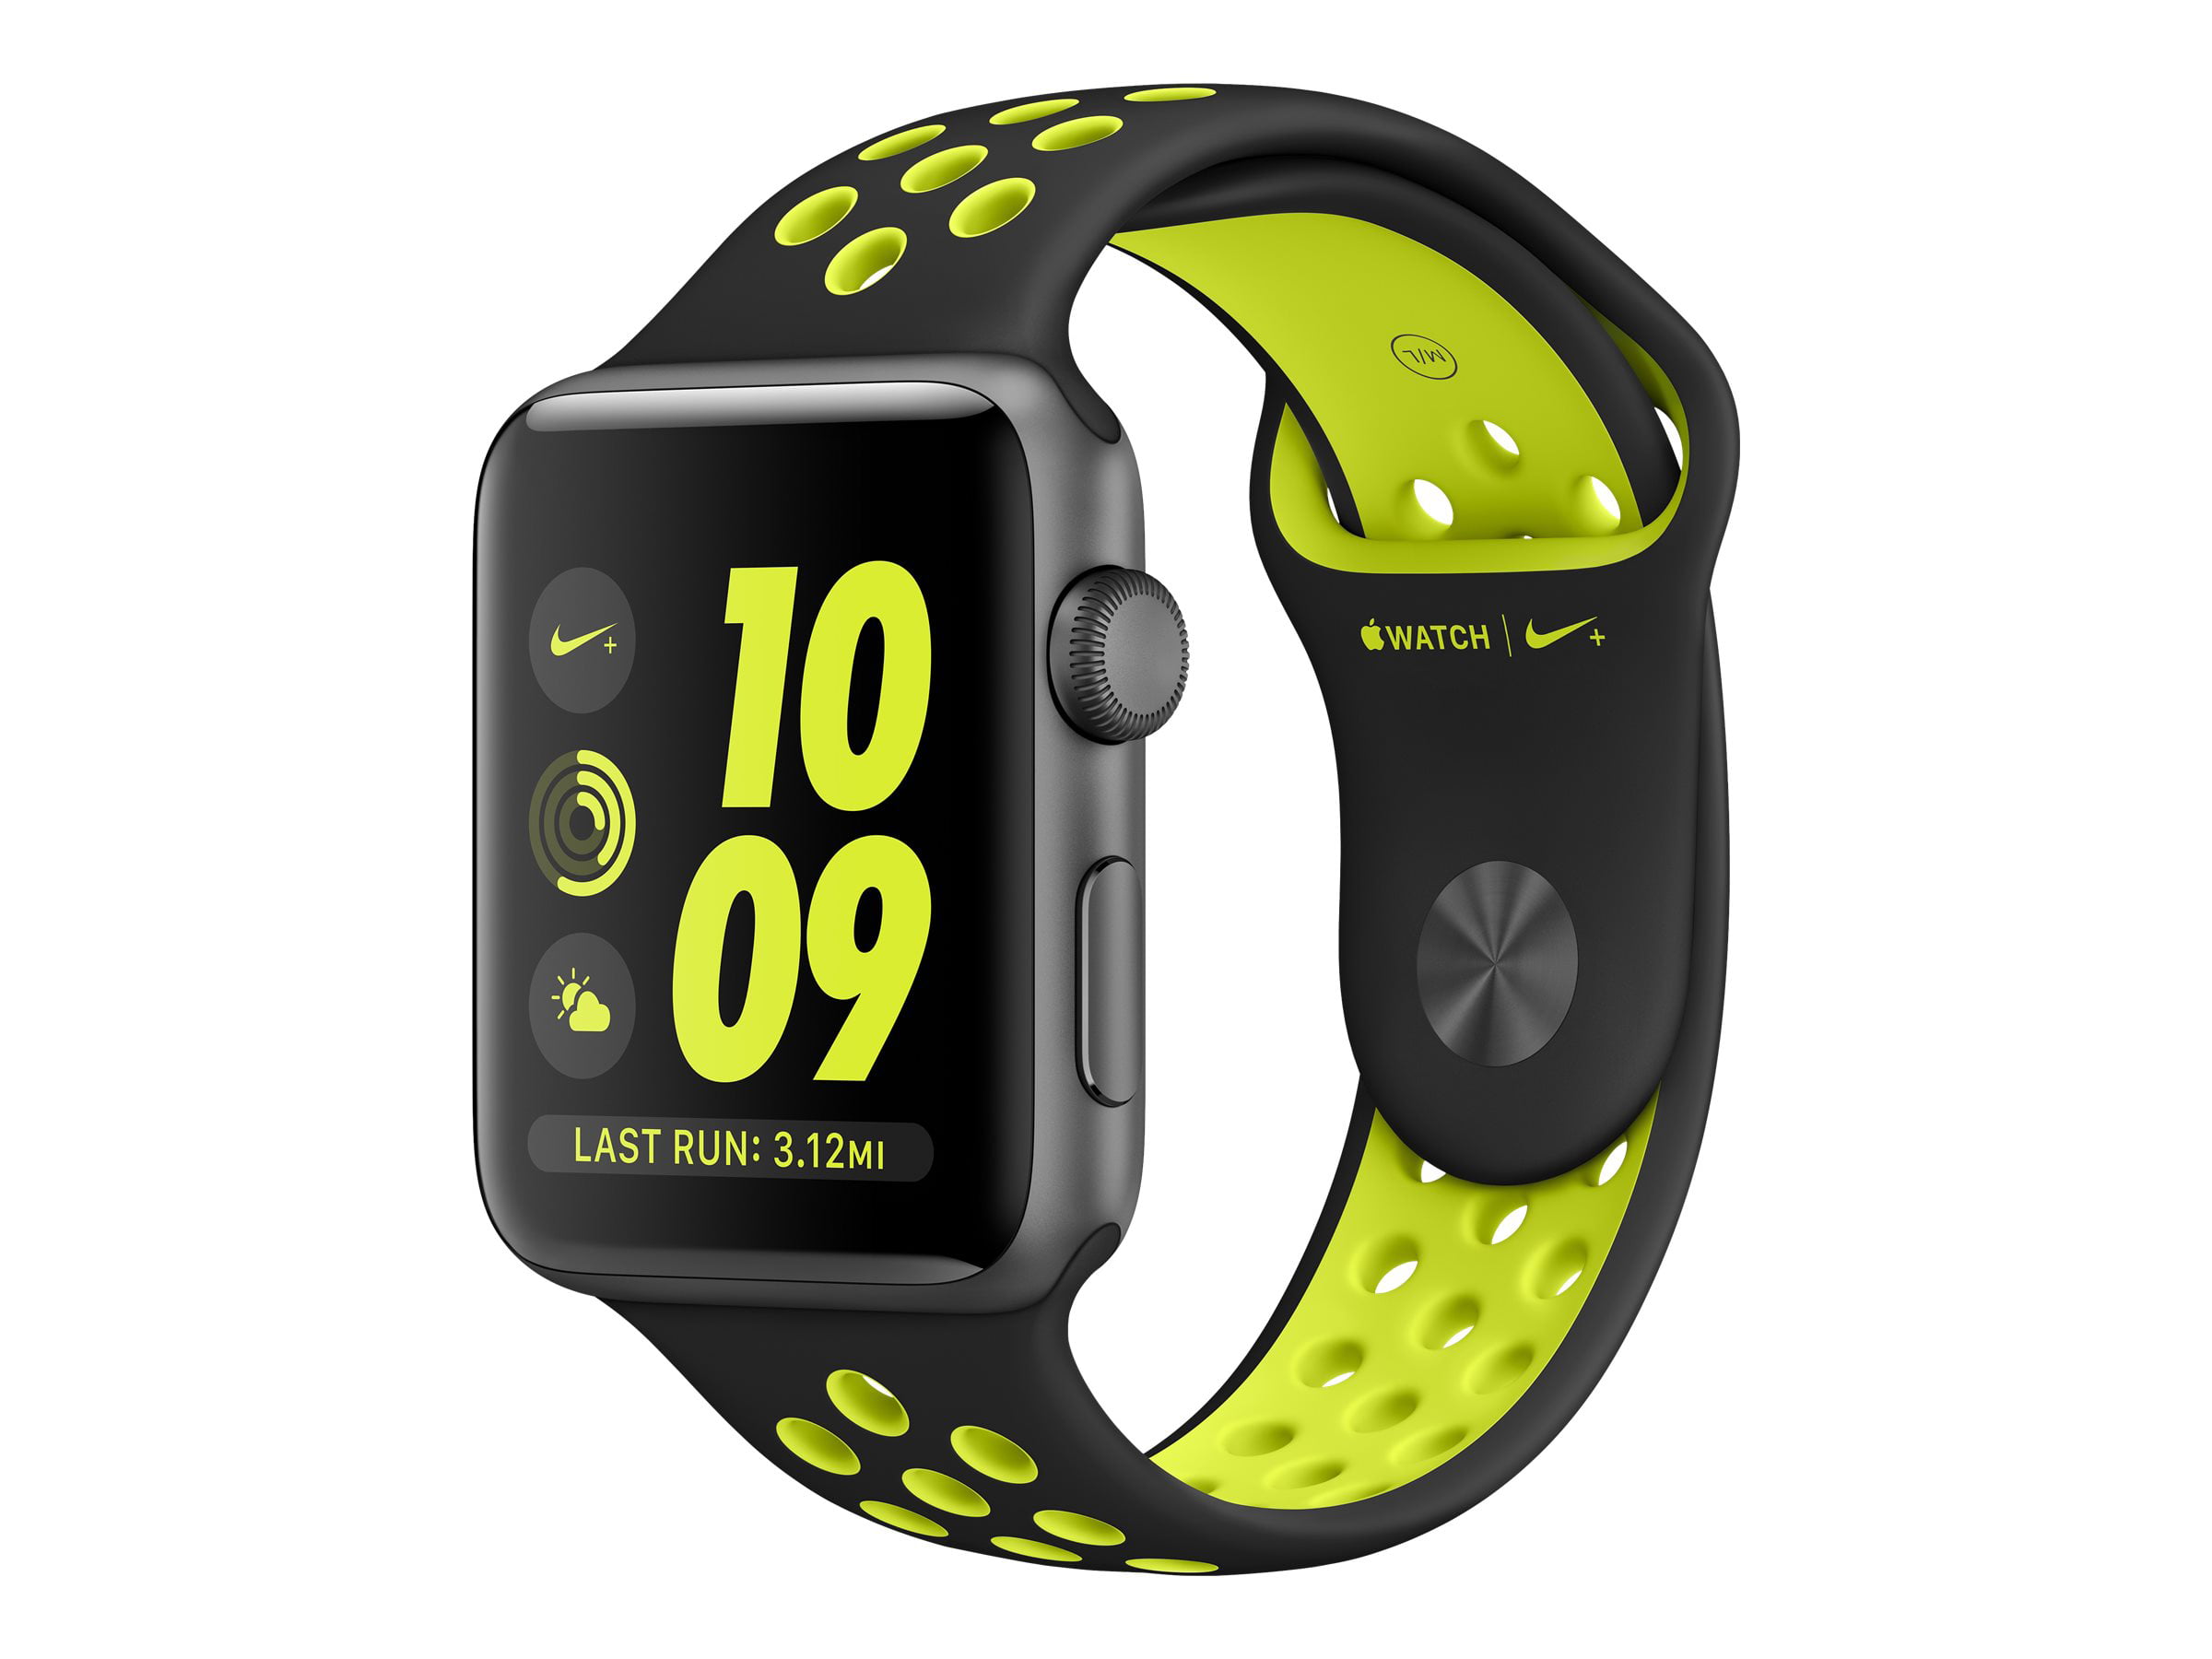 Apple Watch Nike+ Series 2 - 42 mm - space gray aluminum - smart watch with  Nike sport band - fluoroelastomer - balck/volt - band size: S/M/L - Wi-Fi,  